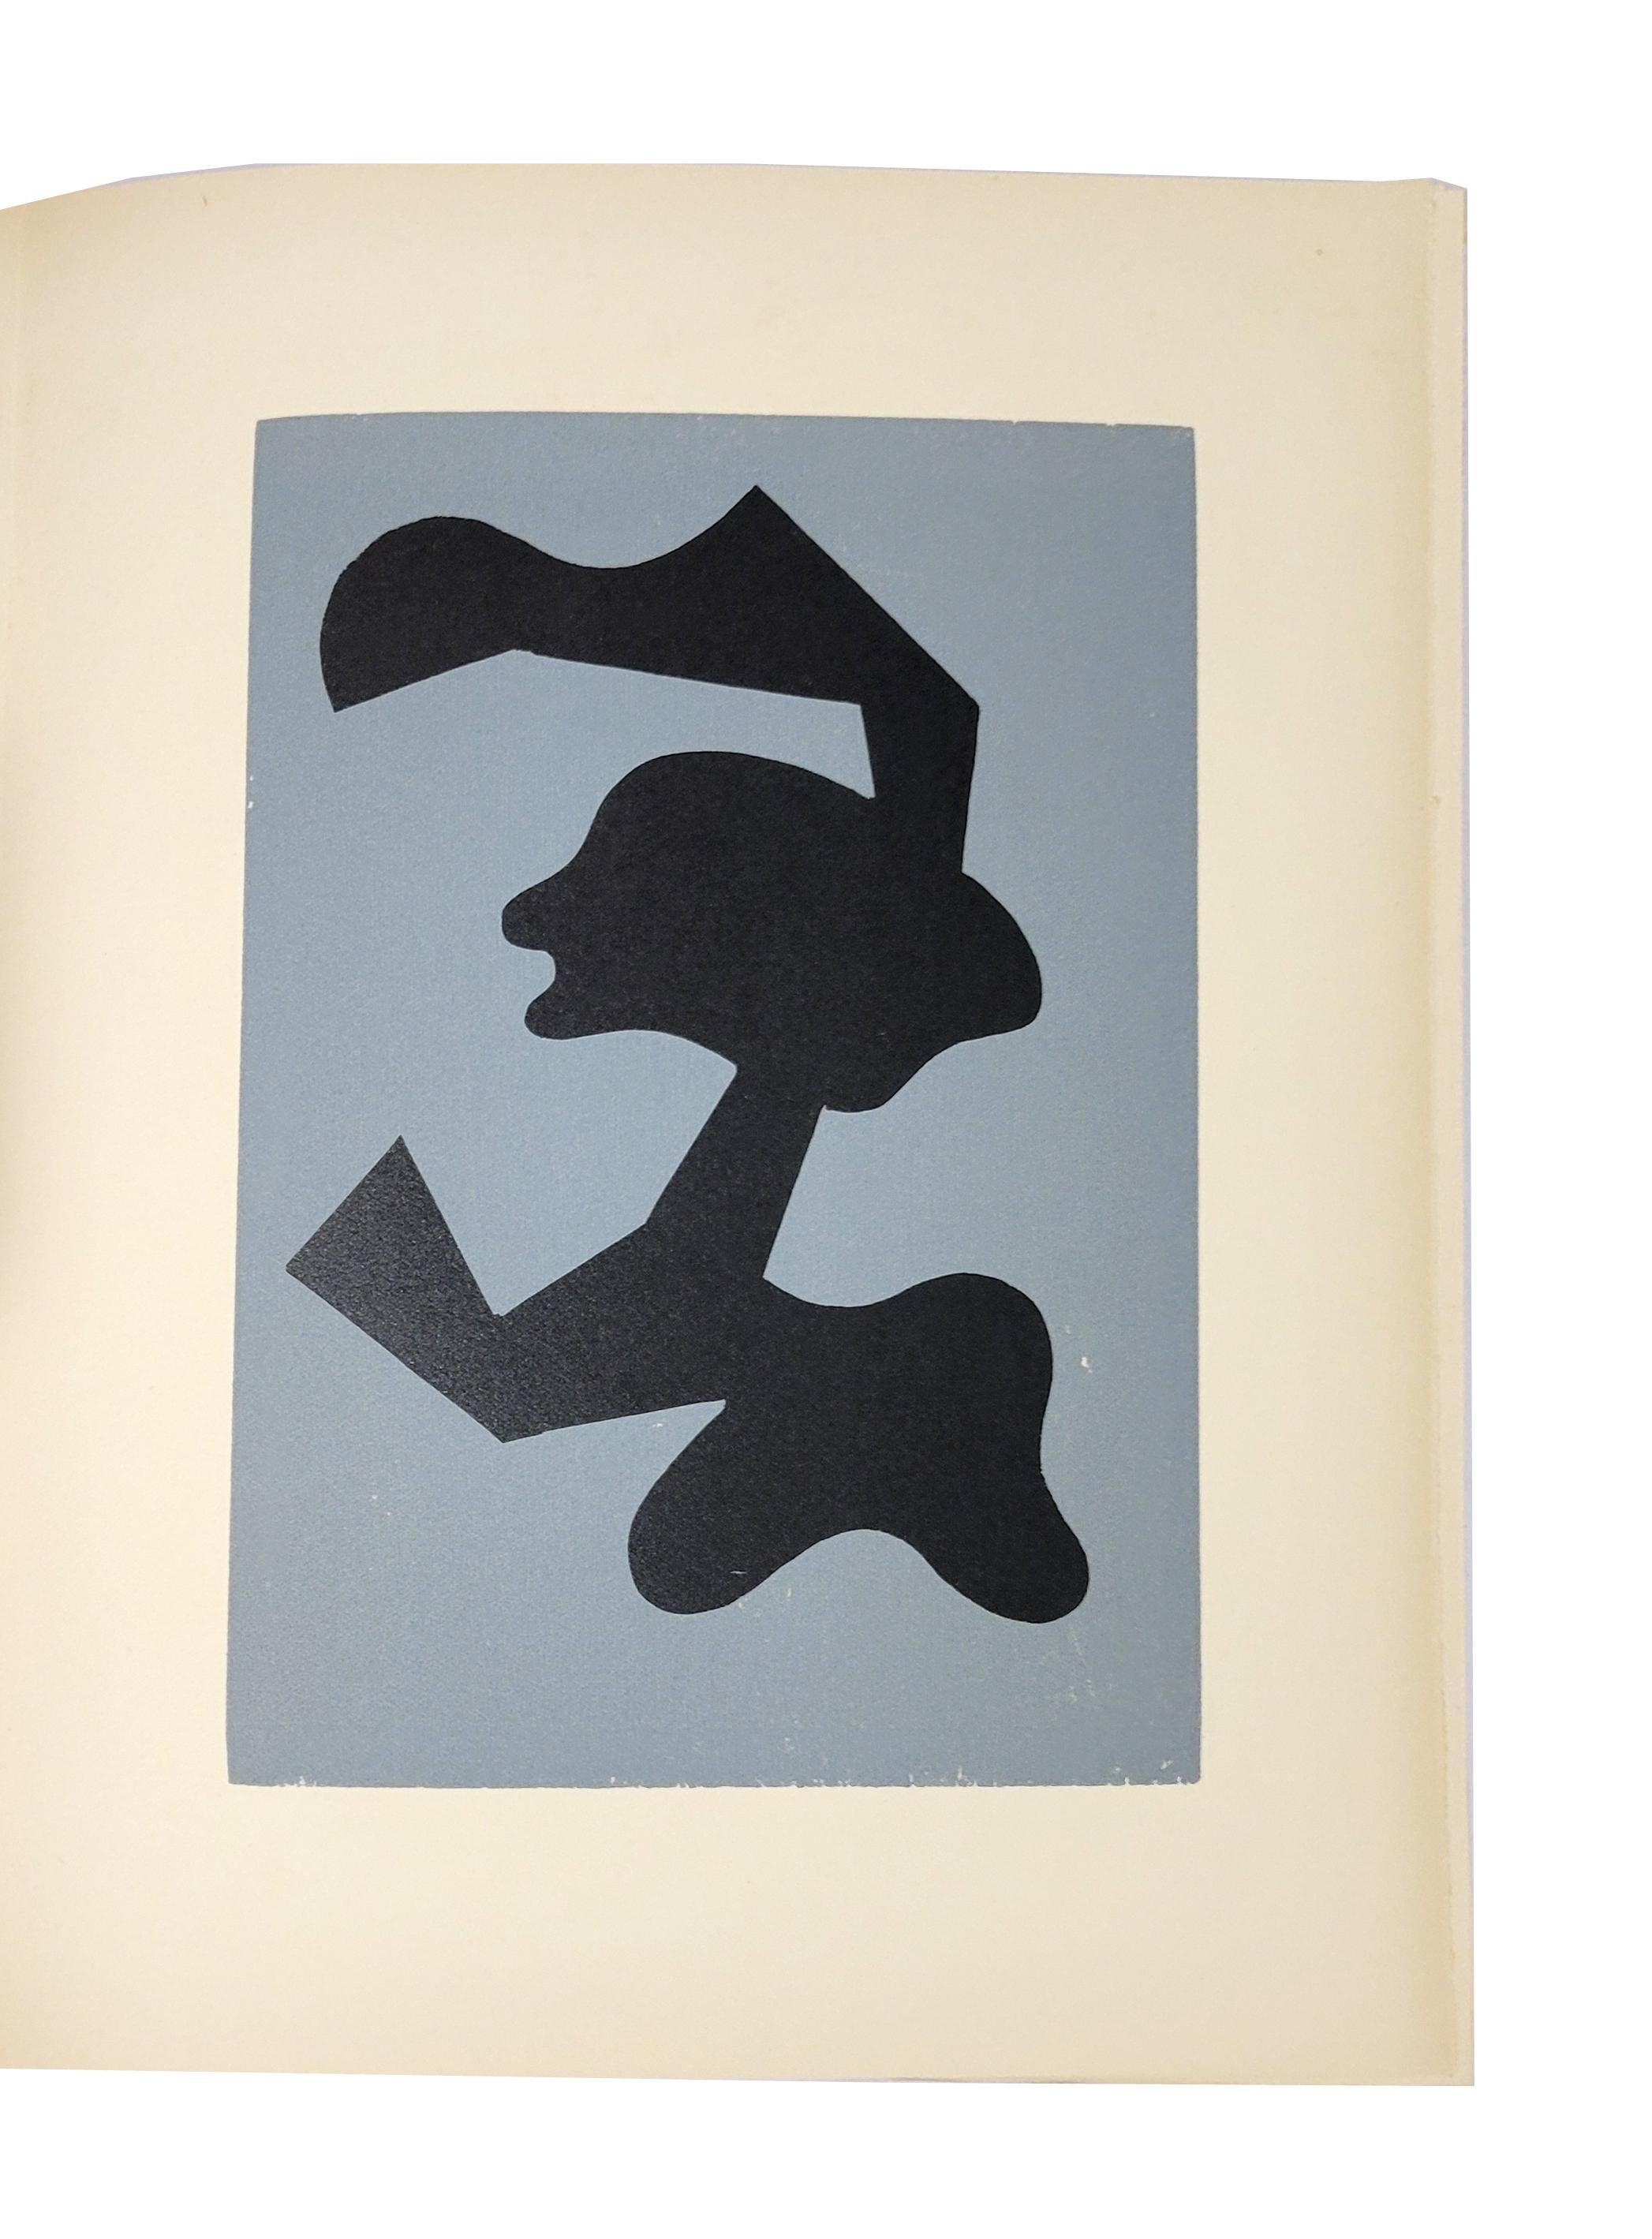  Dreams and Projects. I - Print by Hans (Jean) Arp